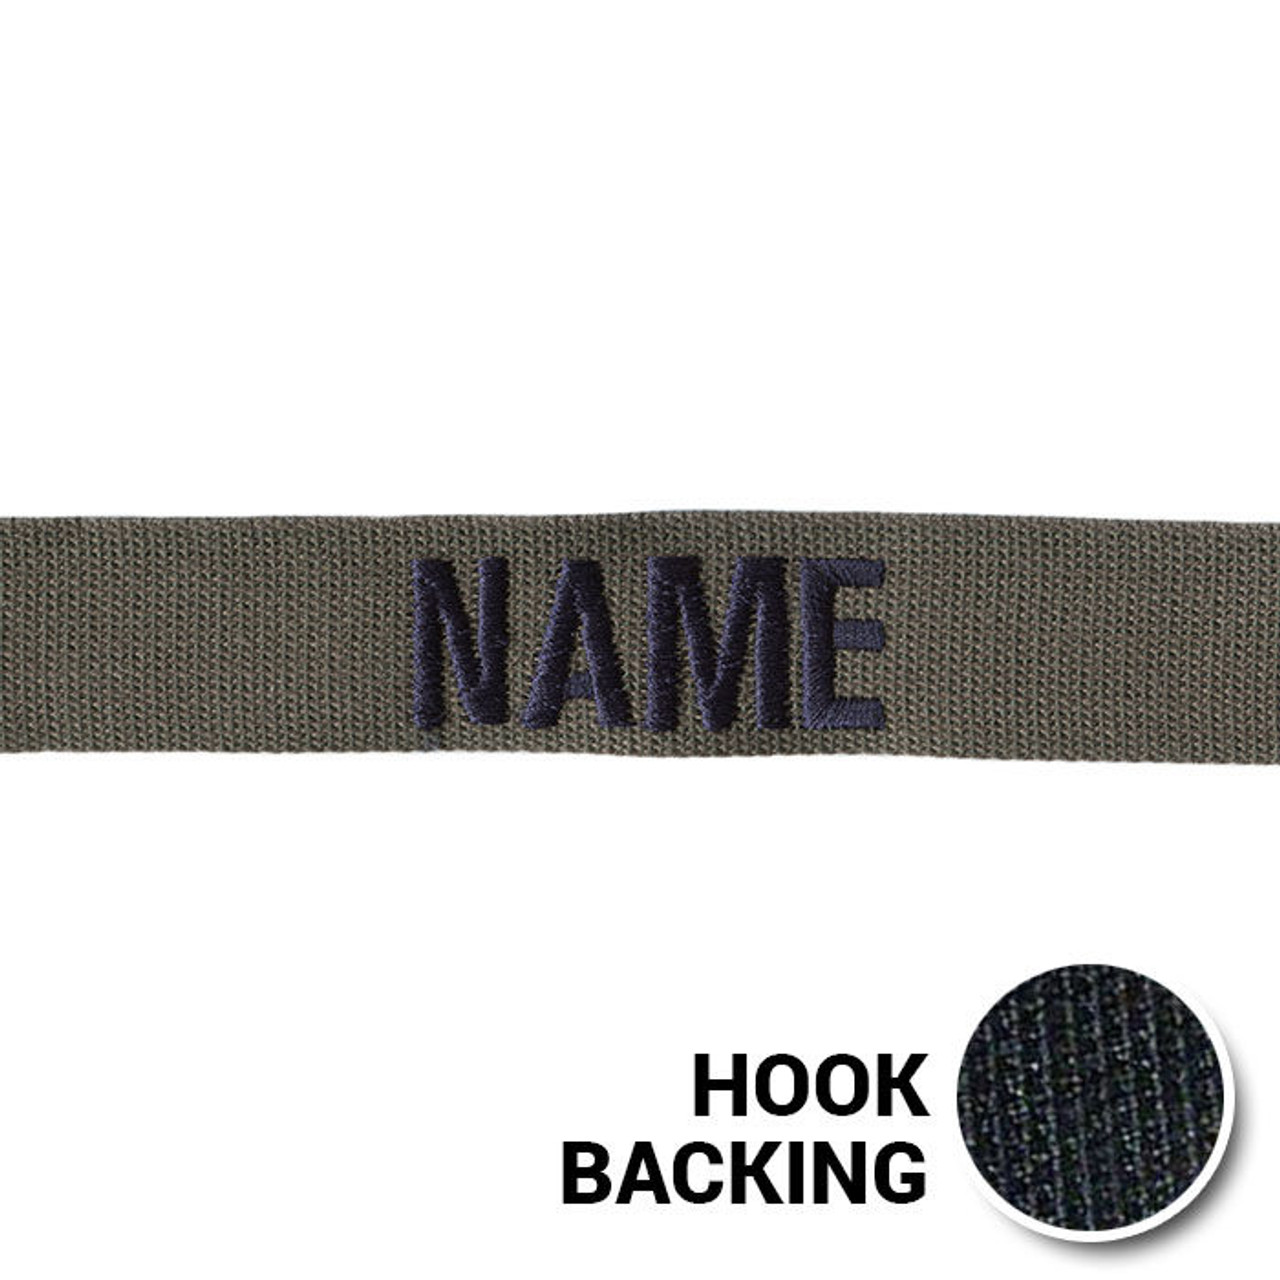 Custom Velcro Name Tapes get the exact size you need!